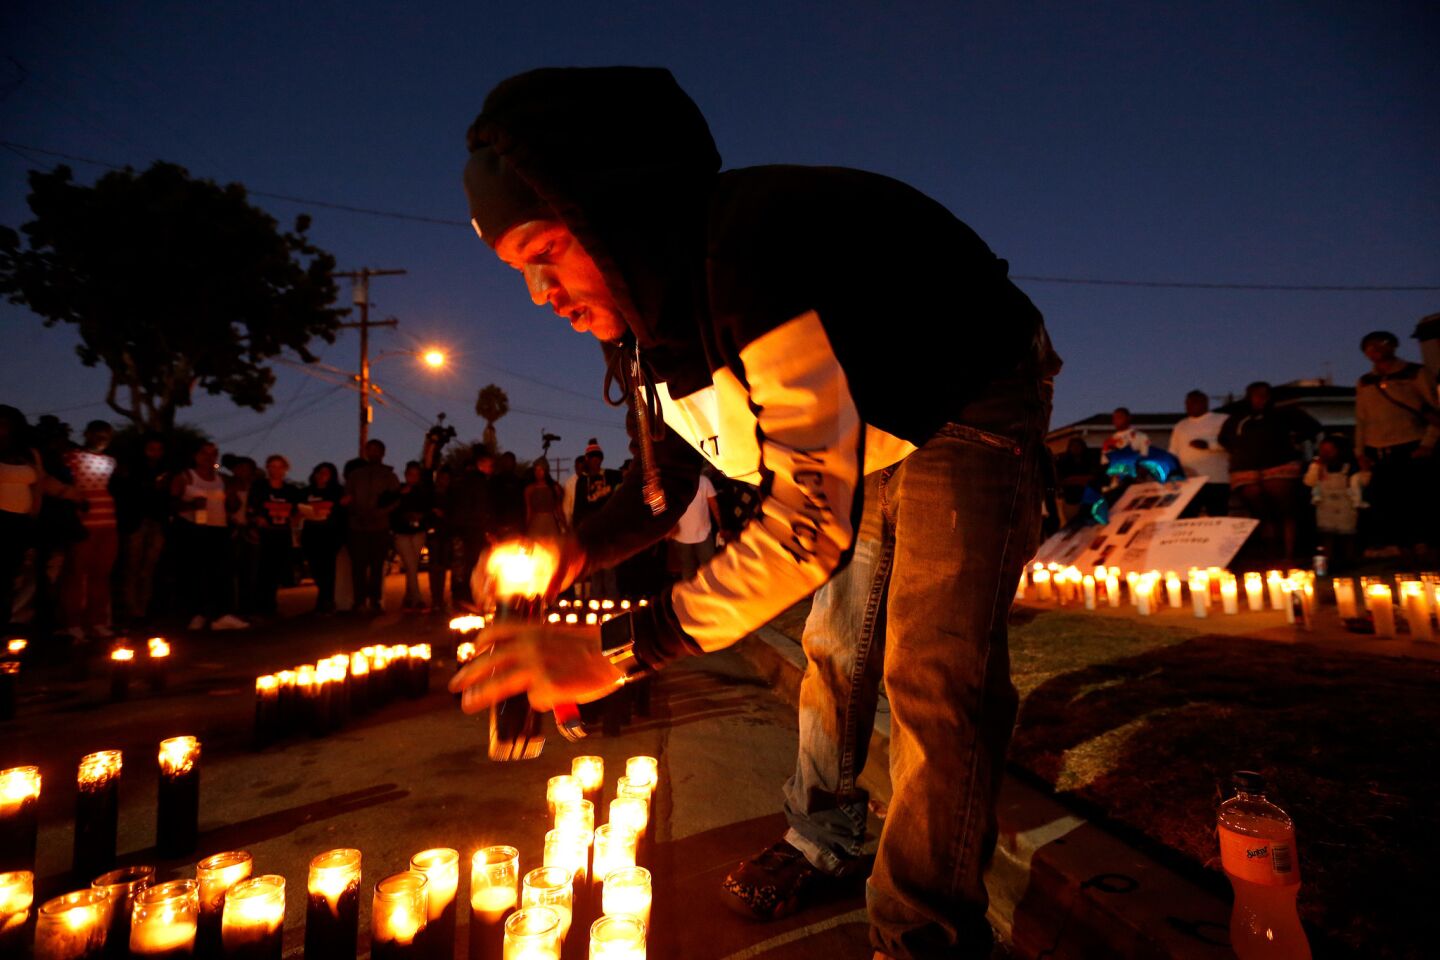 Jeromy Jackson lights candles at a vigil for his friend Carnell Snell Jr., 18, who was fatally shot by LAPD police Saturday after a vehicle pursuit.